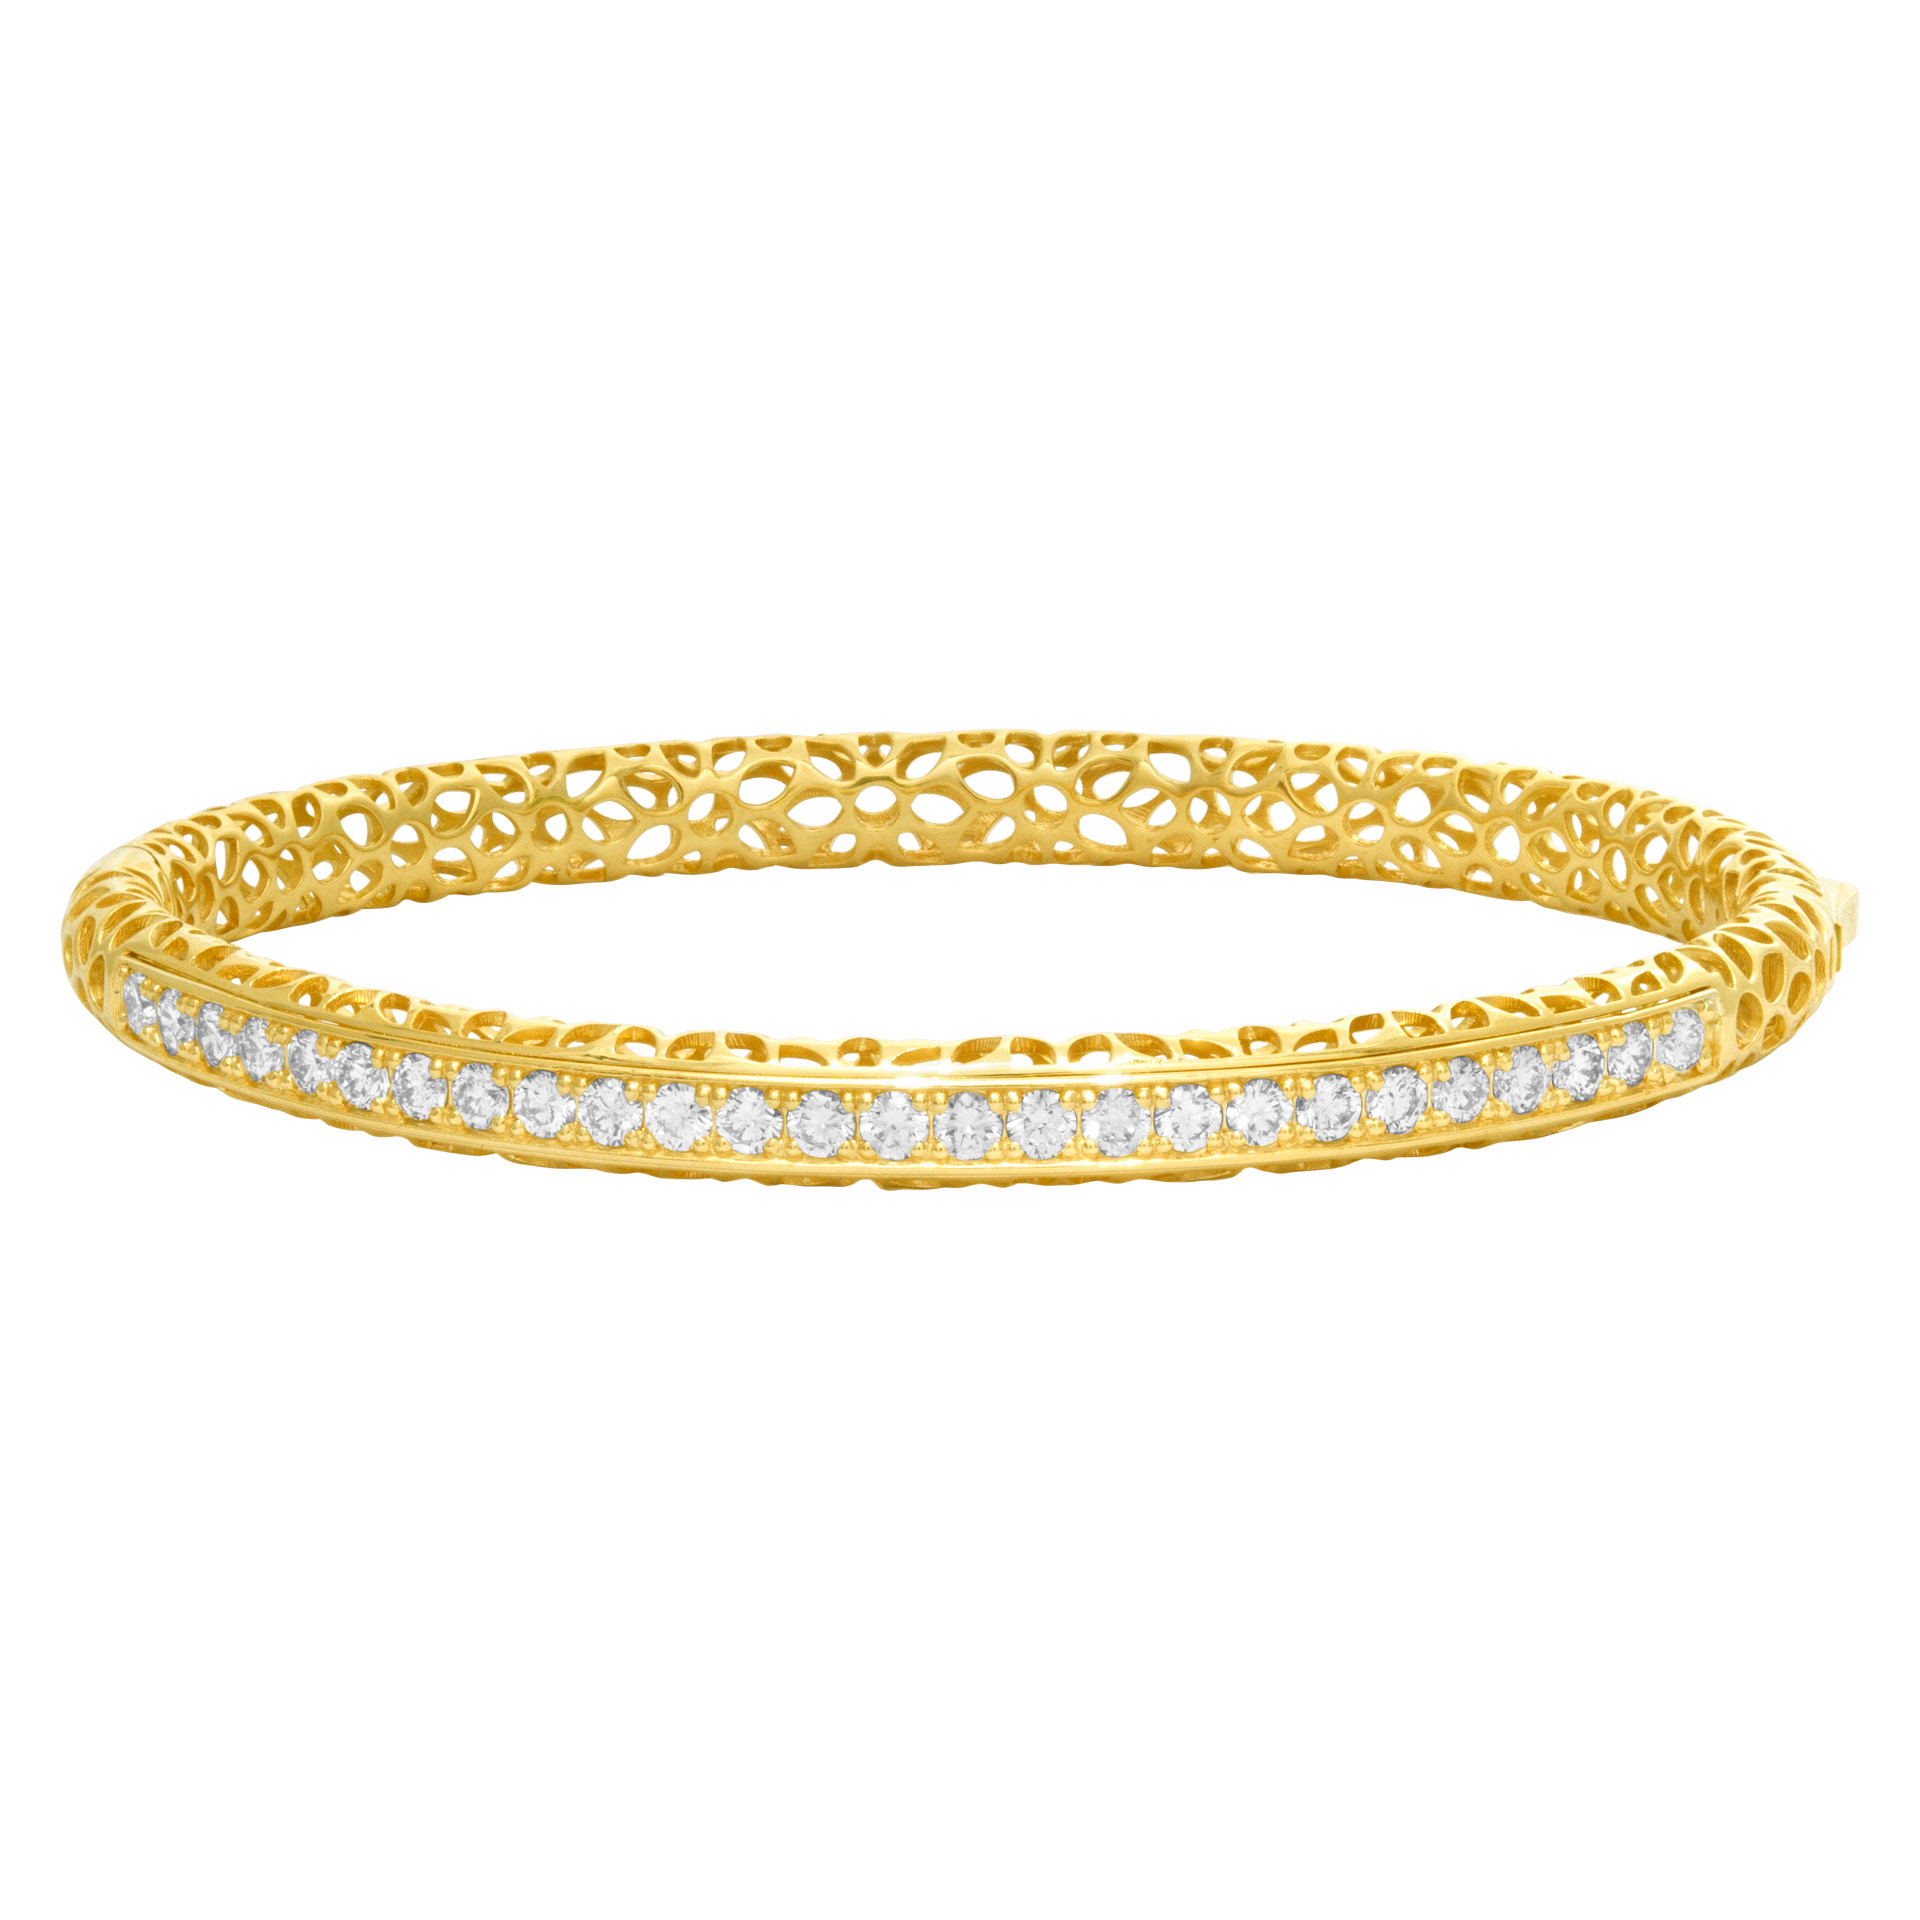 Diamond bangle with 1.47 cts in diamonds (G-H color, VS clarity) set in 18k